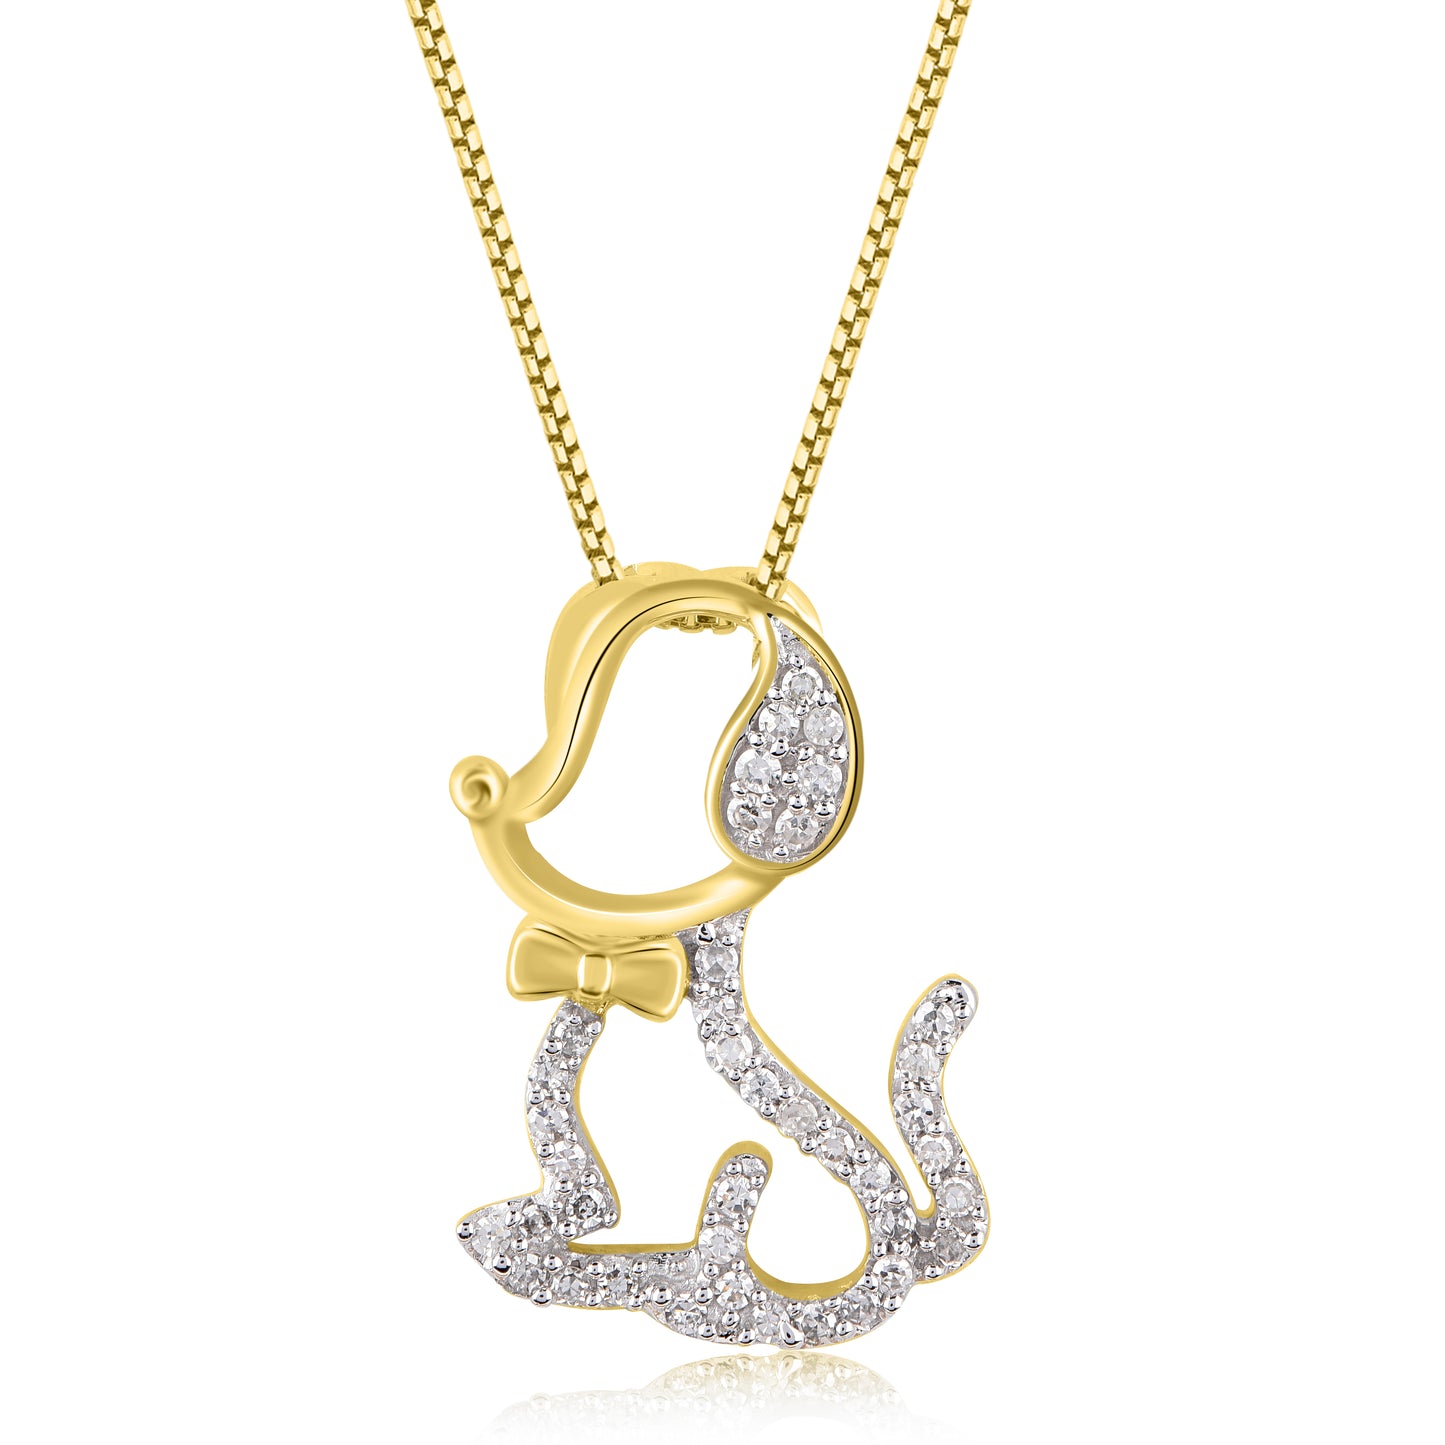 Puppy Dog Pendant Necklace in 10K Gold